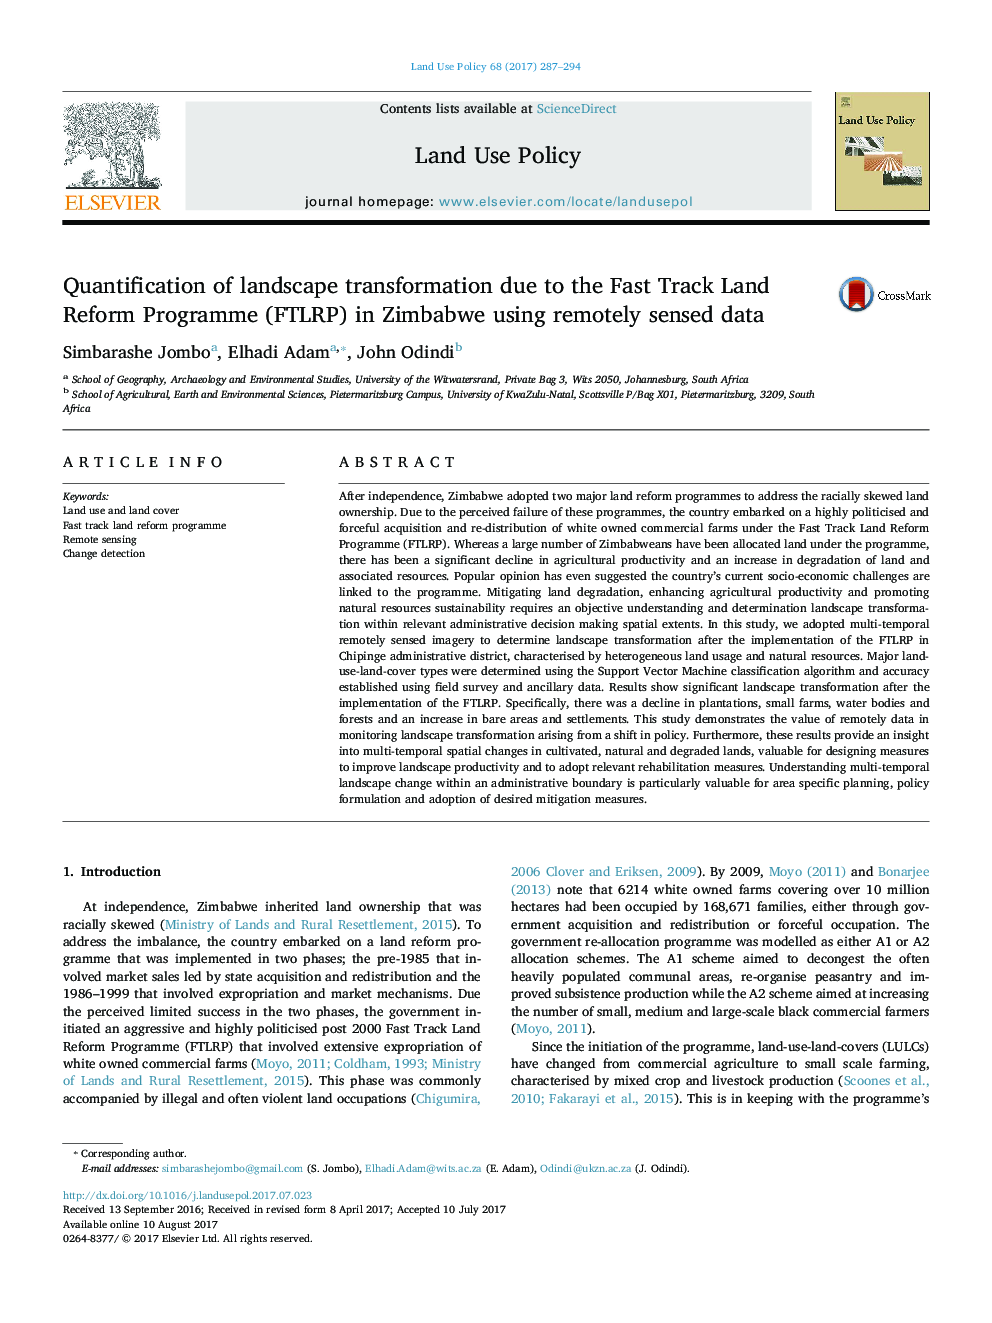 Quantification of landscape transformation due to the Fast Track Land Reform Programme (FTLRP) in Zimbabwe using remotely sensed data